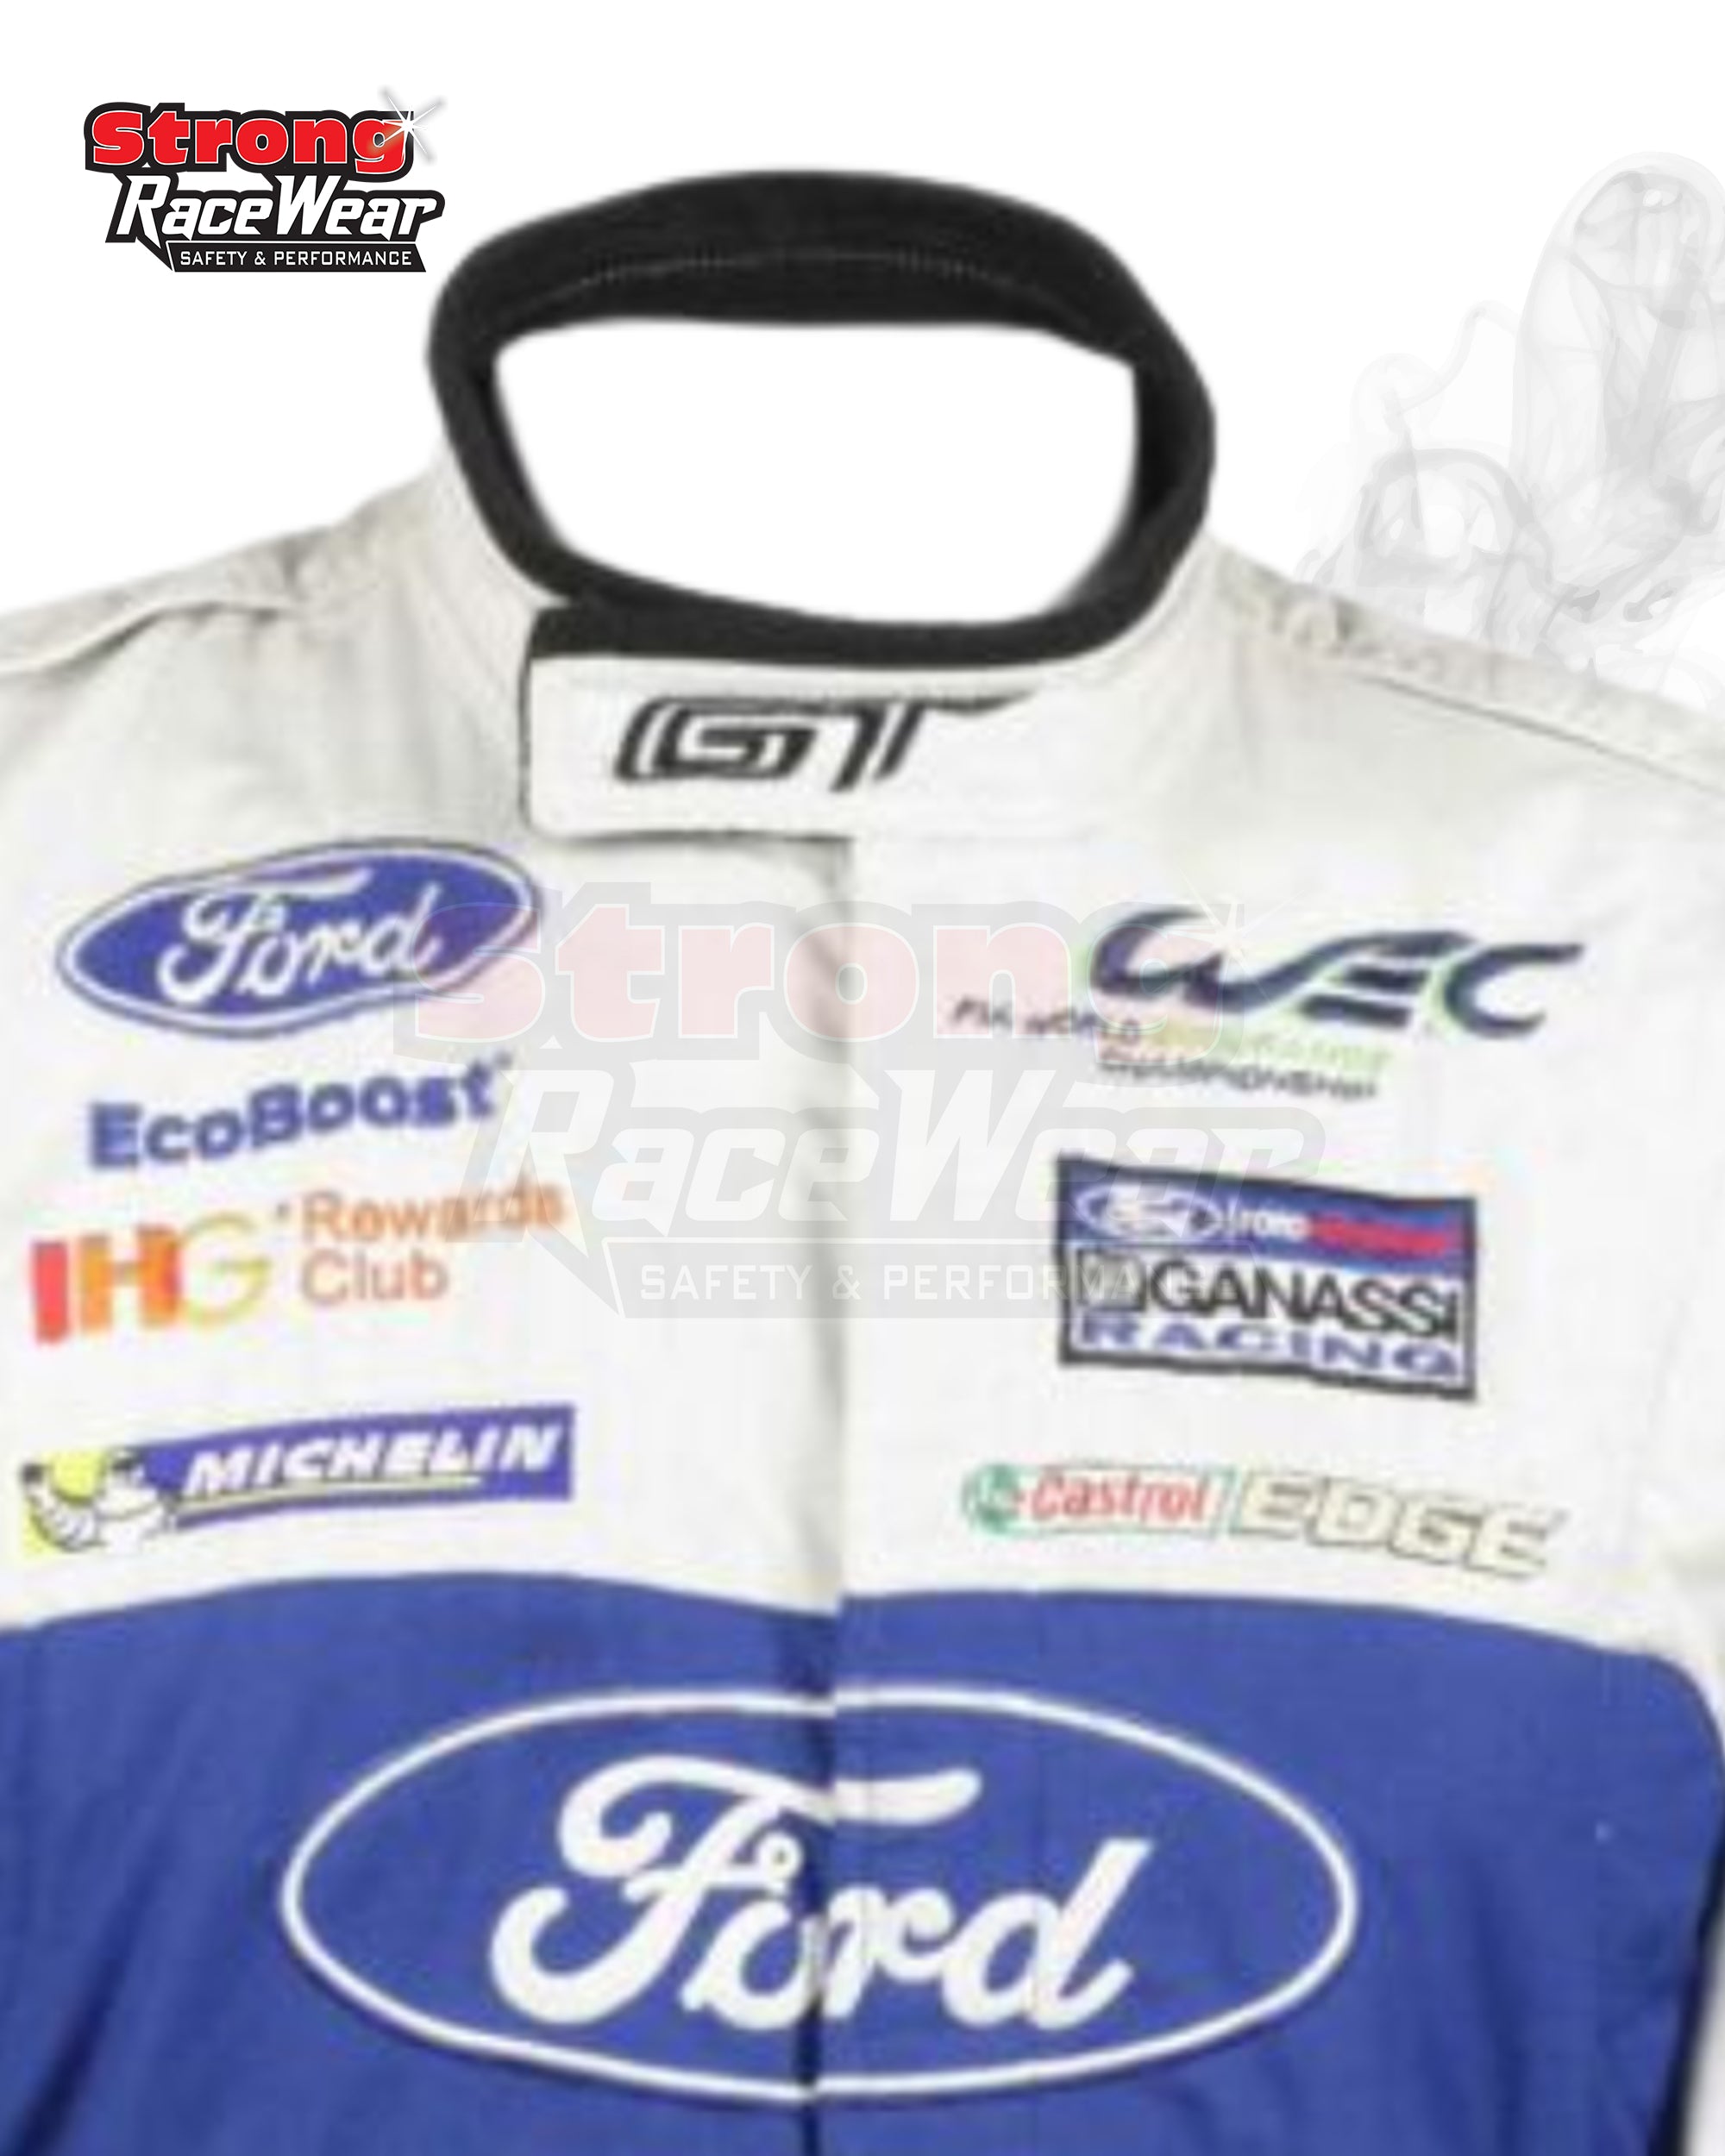 2017 Andy Priaulx Ford GT Chip Ganassi Racing Le Mans 24hr suits